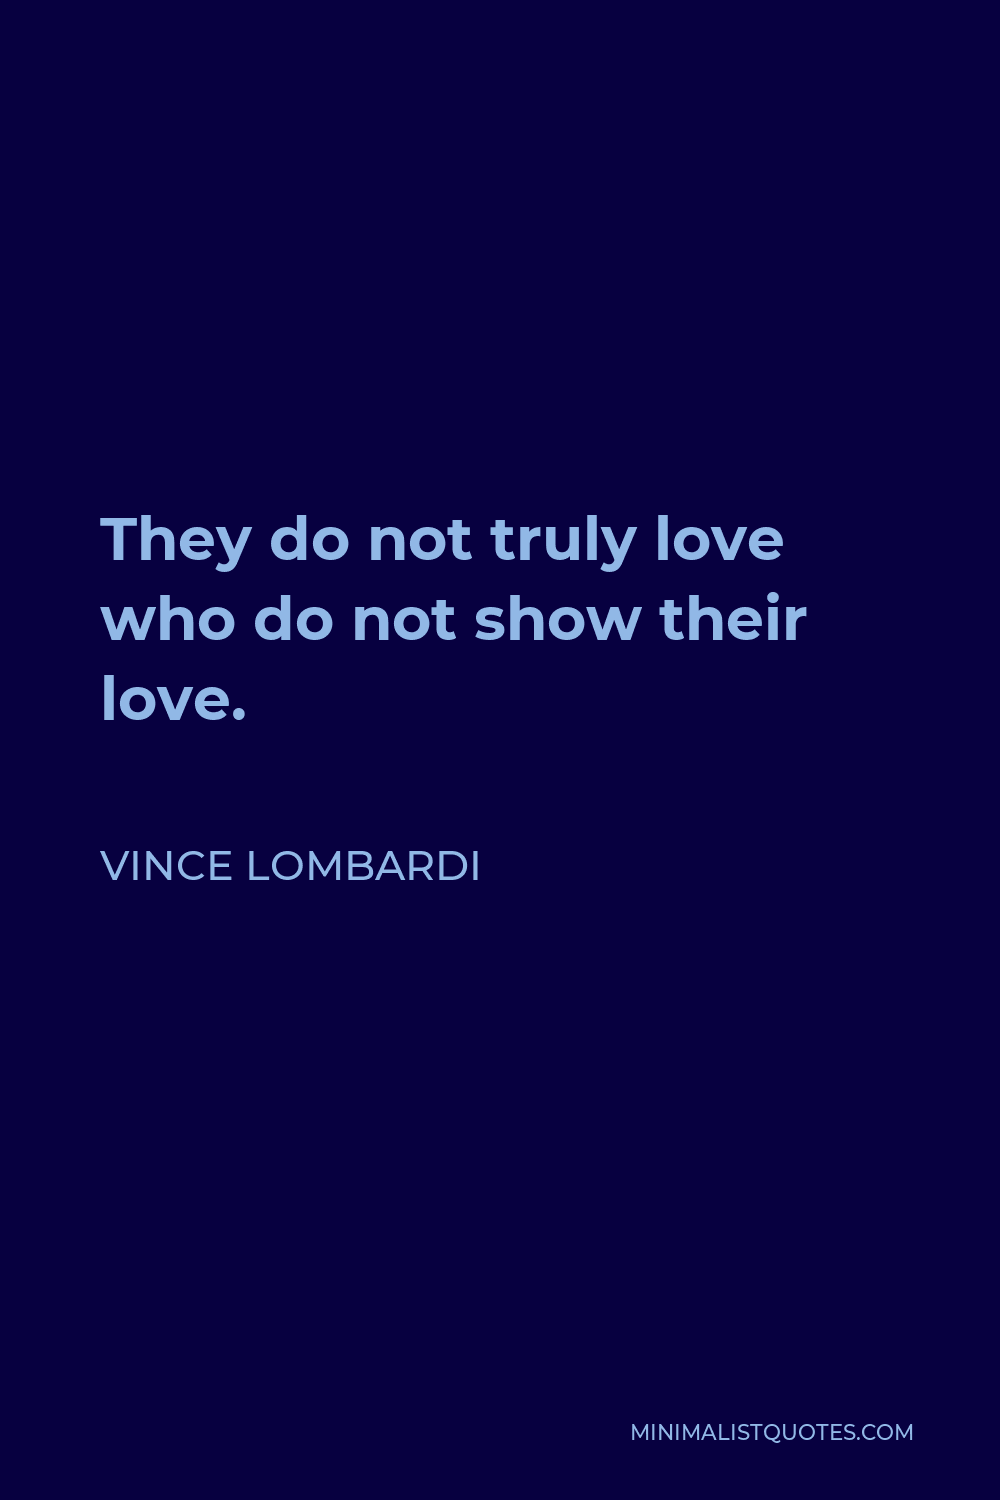 Vince Lombardi Quote - They do not truly love who do not show their love.